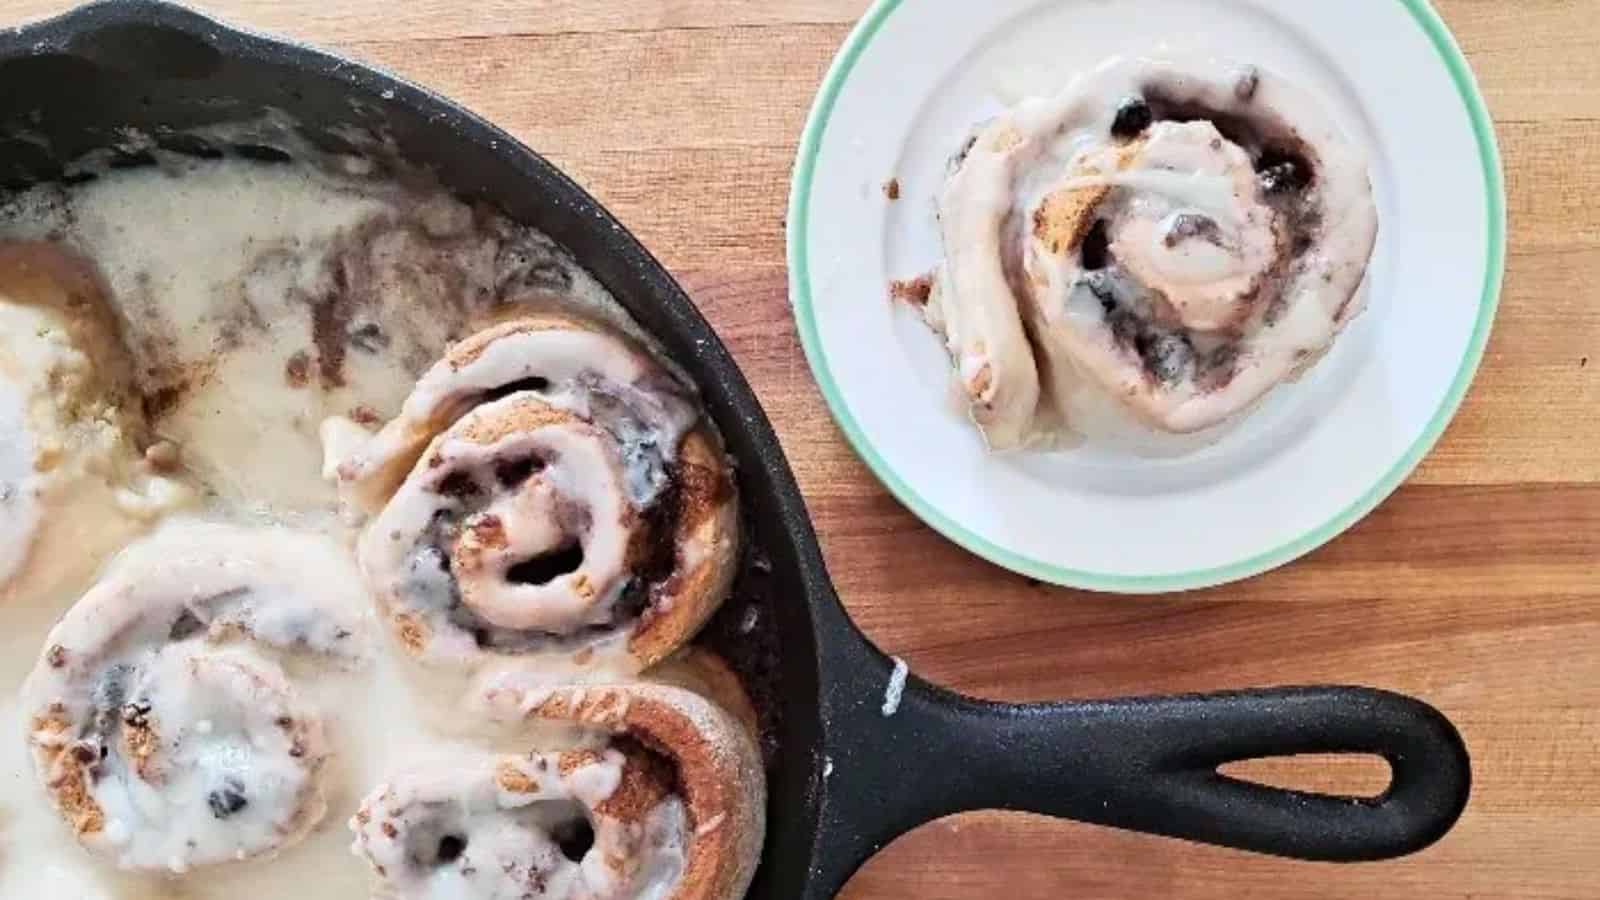 Image shows an overhead shot of Cinnamon rolls in a skillet on a wooden table with one cinnamon roll on a plate.